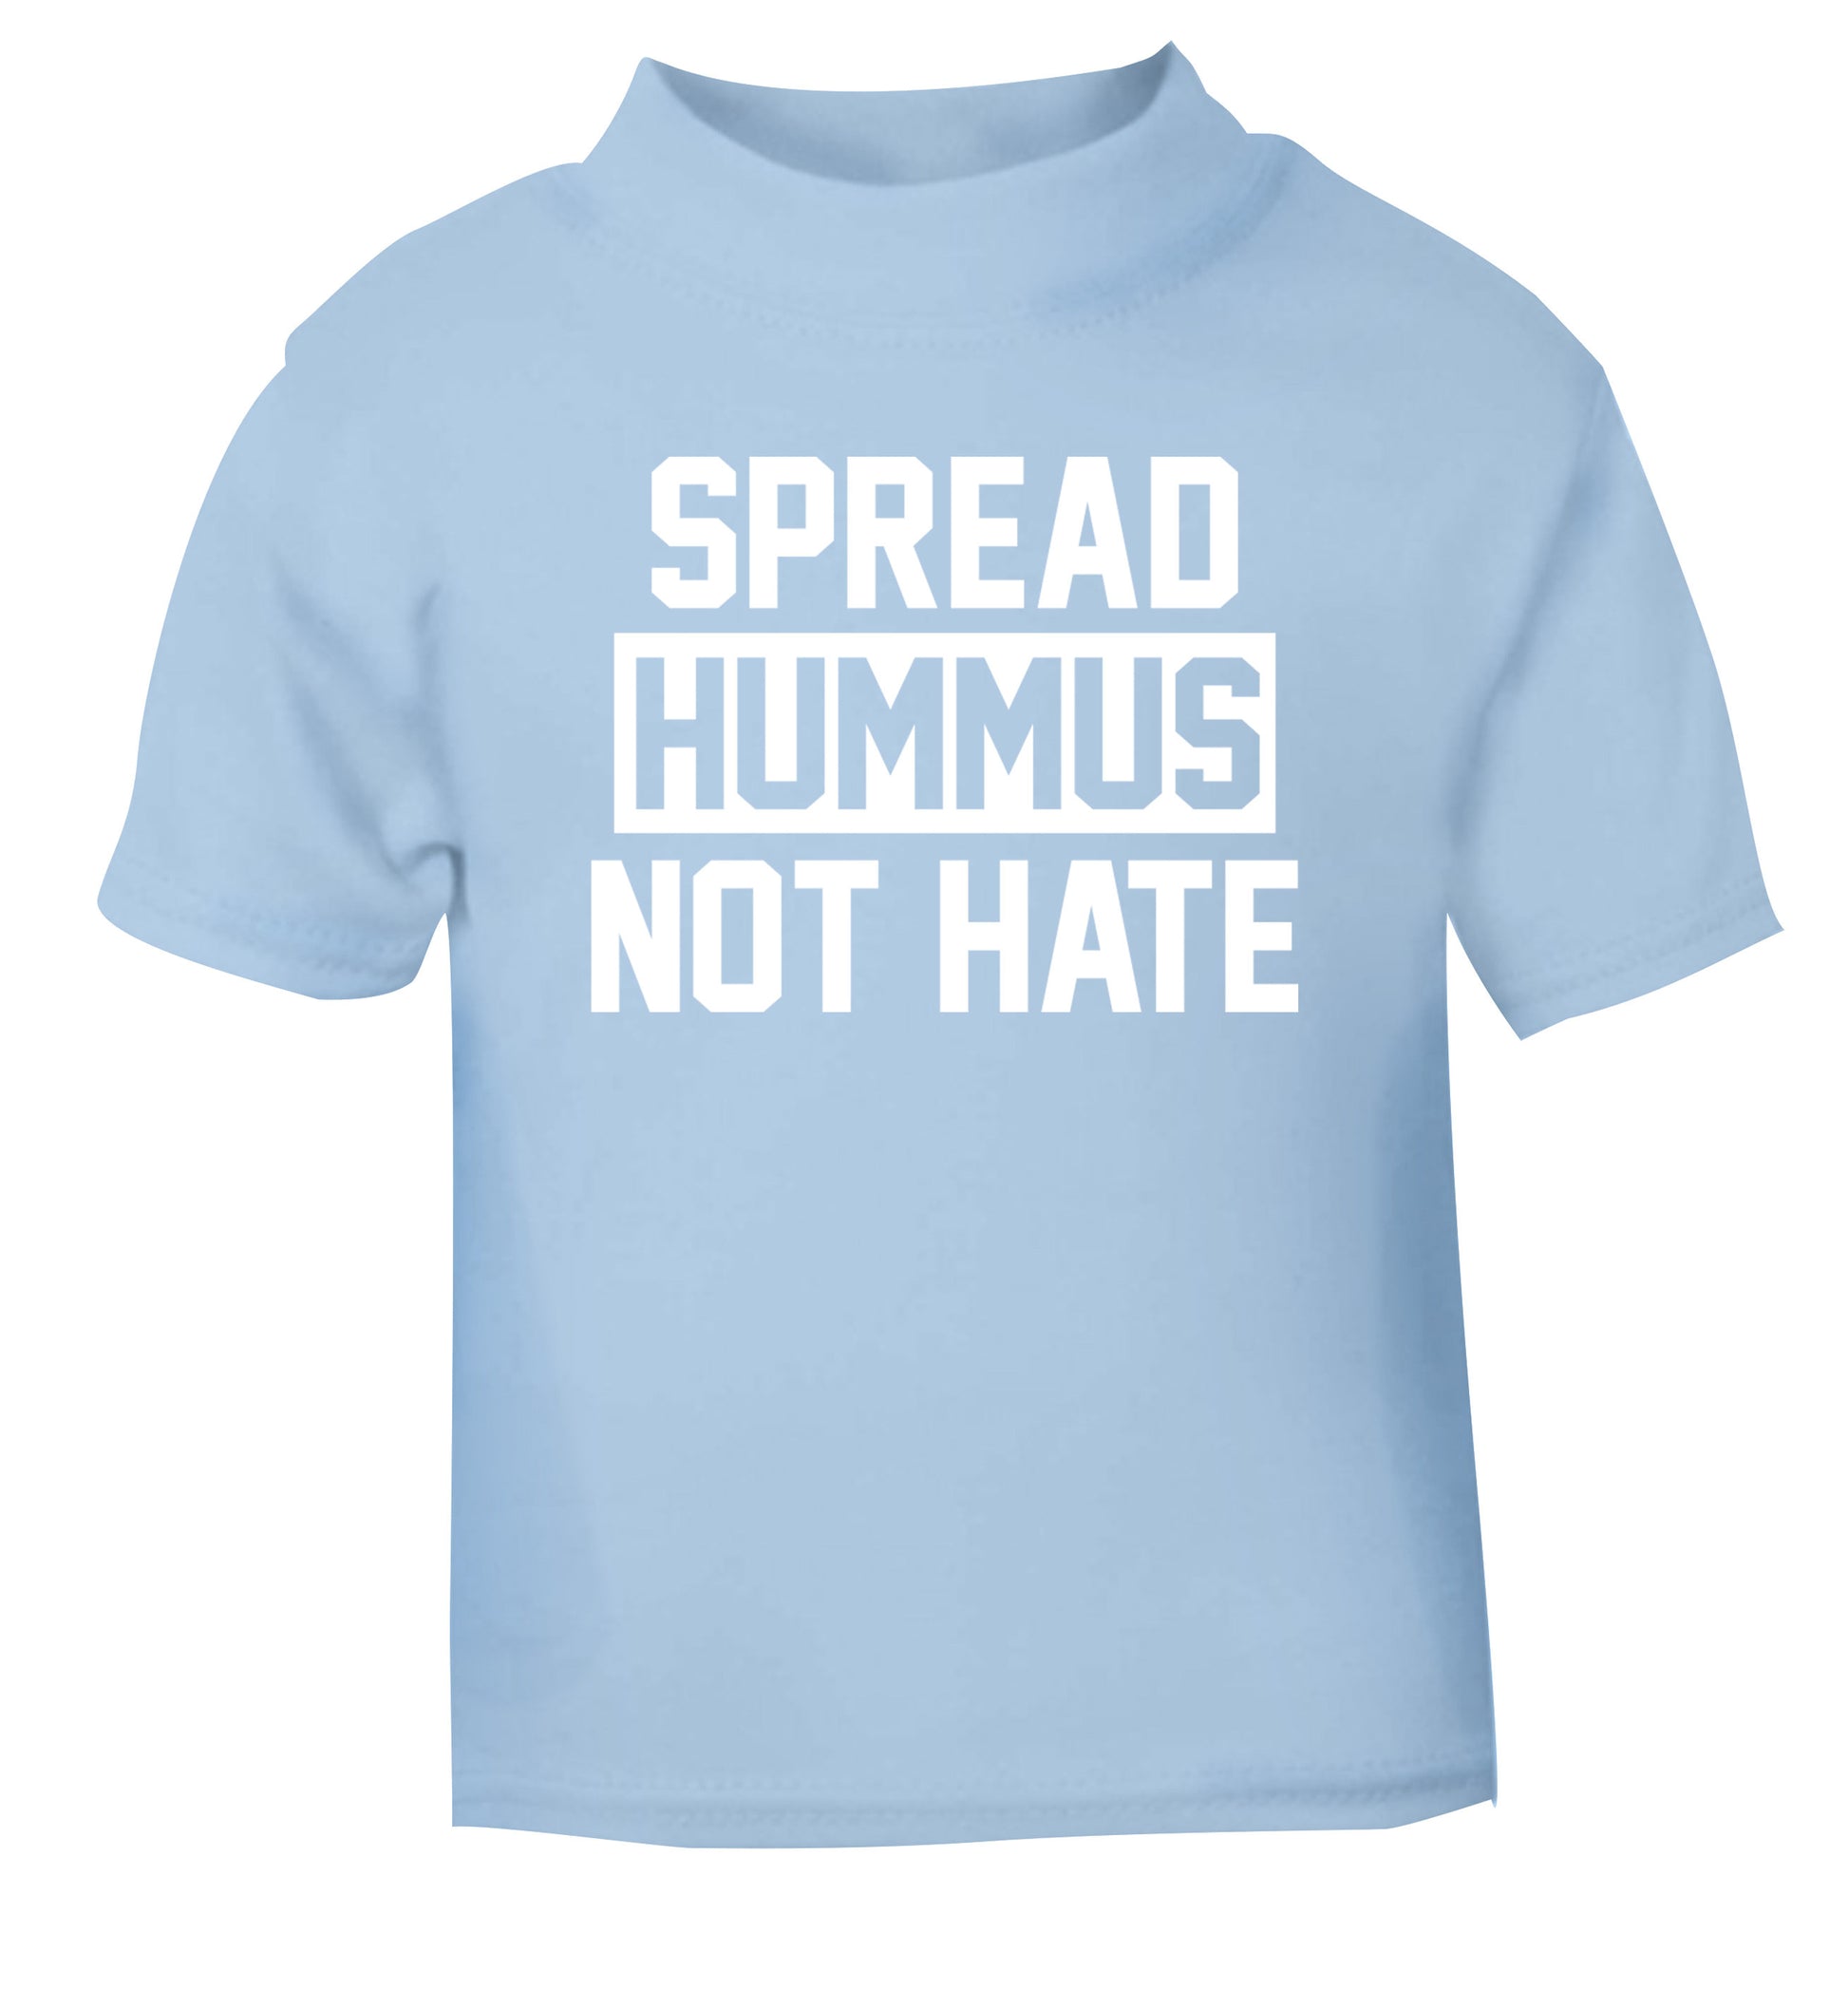 Spread hummus not hate light blue Baby Toddler Tshirt 2 Years